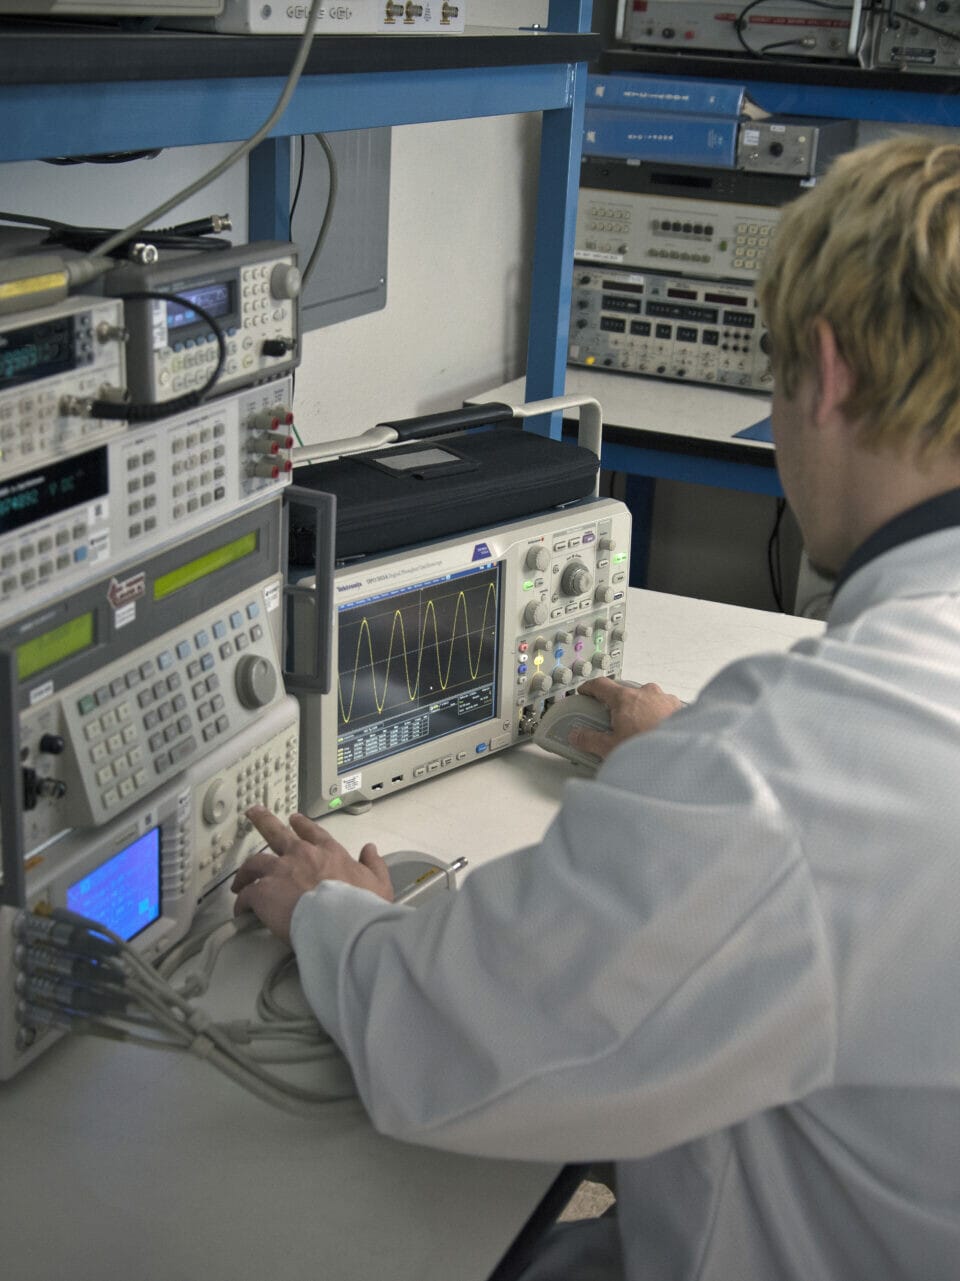 Calibrating equipment in the lab